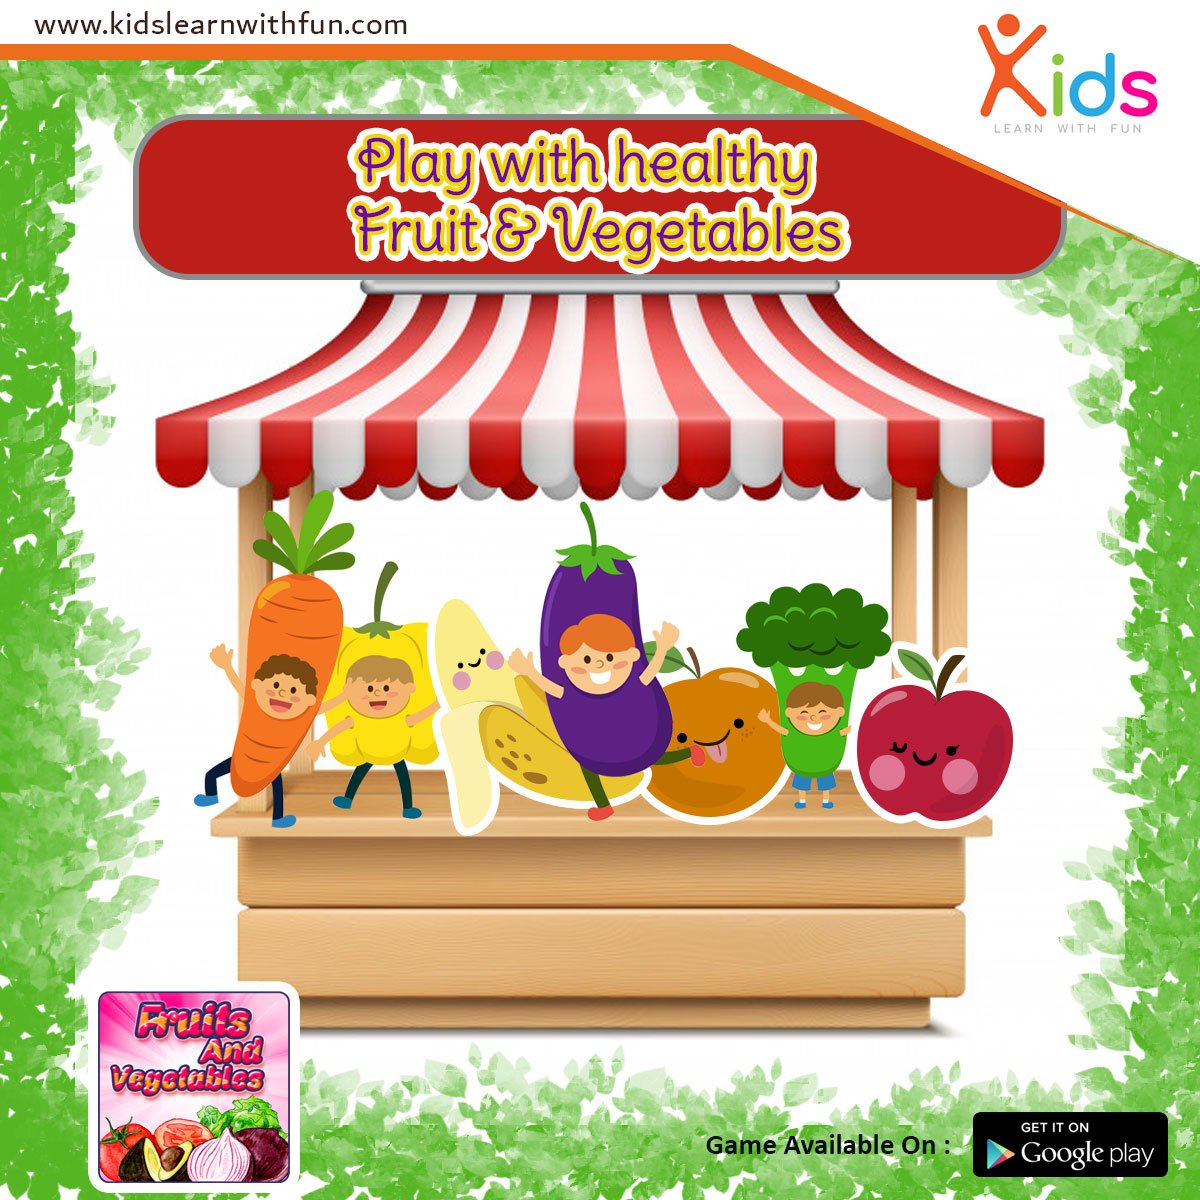 Play with Healthy #fruits & #vegetables : play.google.com/store/apps/det…
#toddlers #moterskill #mindpowerimprovement #cocentration #kidslearnwithfun #fbgame #instantgame #fbinstantgame #gamedev #freegame #gamer #games #fruitgame #indiegame #findthefruit #fruitlove #fruitgame